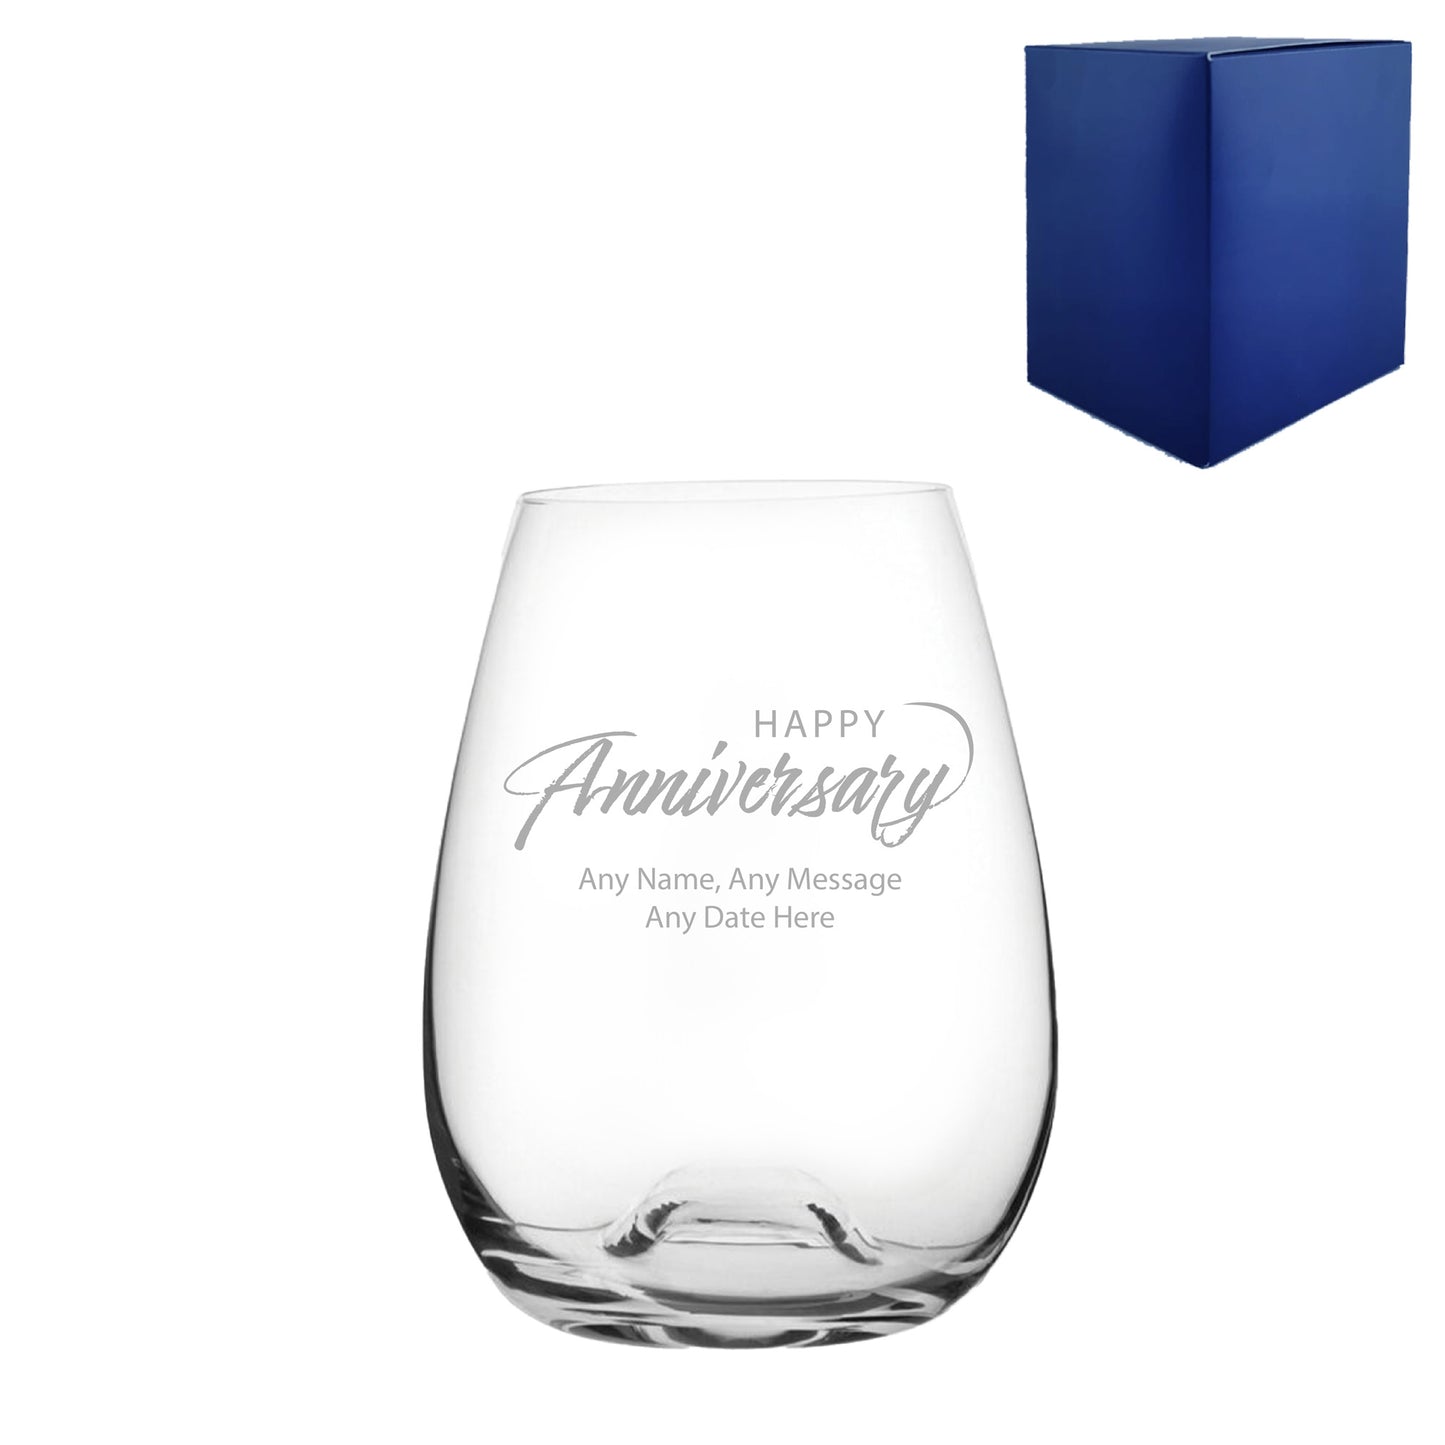 Engraved Happy Anniversary Stemless Wine Glass, Any Message, 15oz Bordeaux, Script Design Image 2